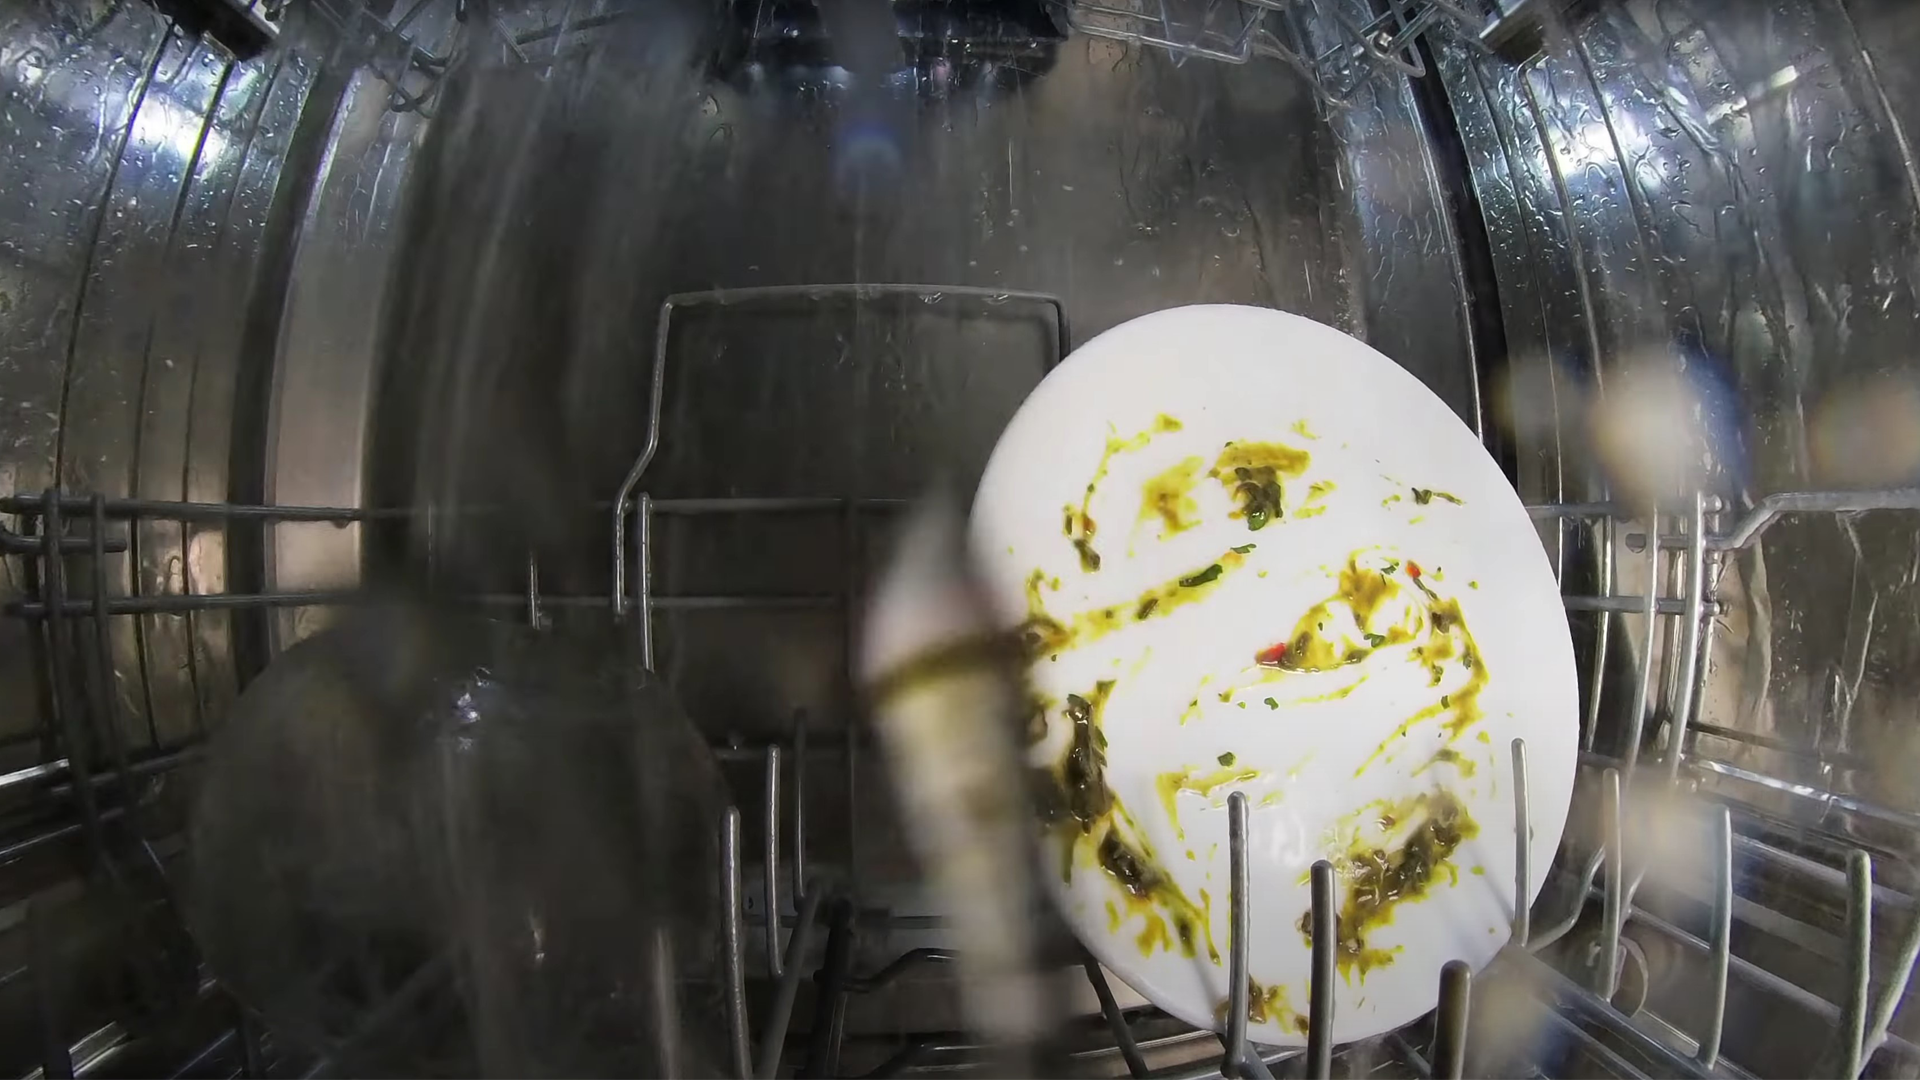 Deplorable: Behold a Dishwasher Flee from the Inner with 4K GoPro Video